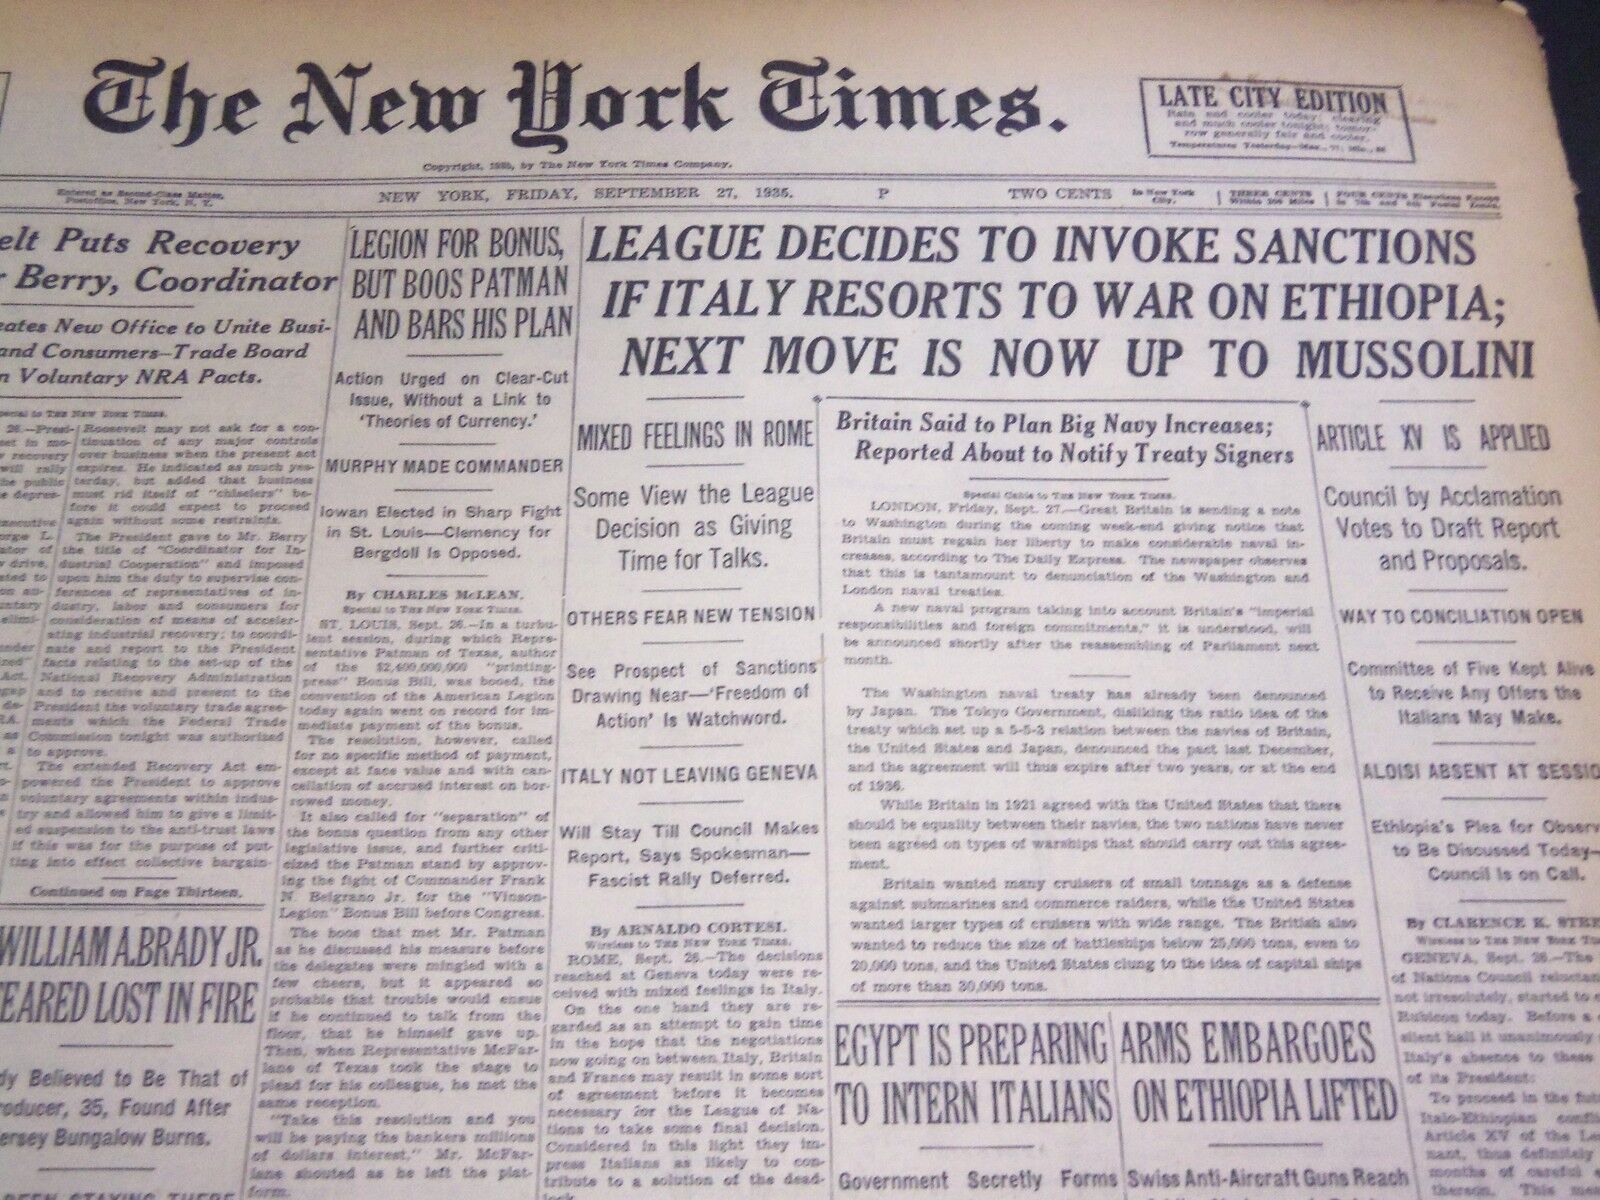 1935 SEPT 27 NEW YORK TIMES - LEAGUE TO INVOKE SANCTIONS ON ITALY - NT 4908